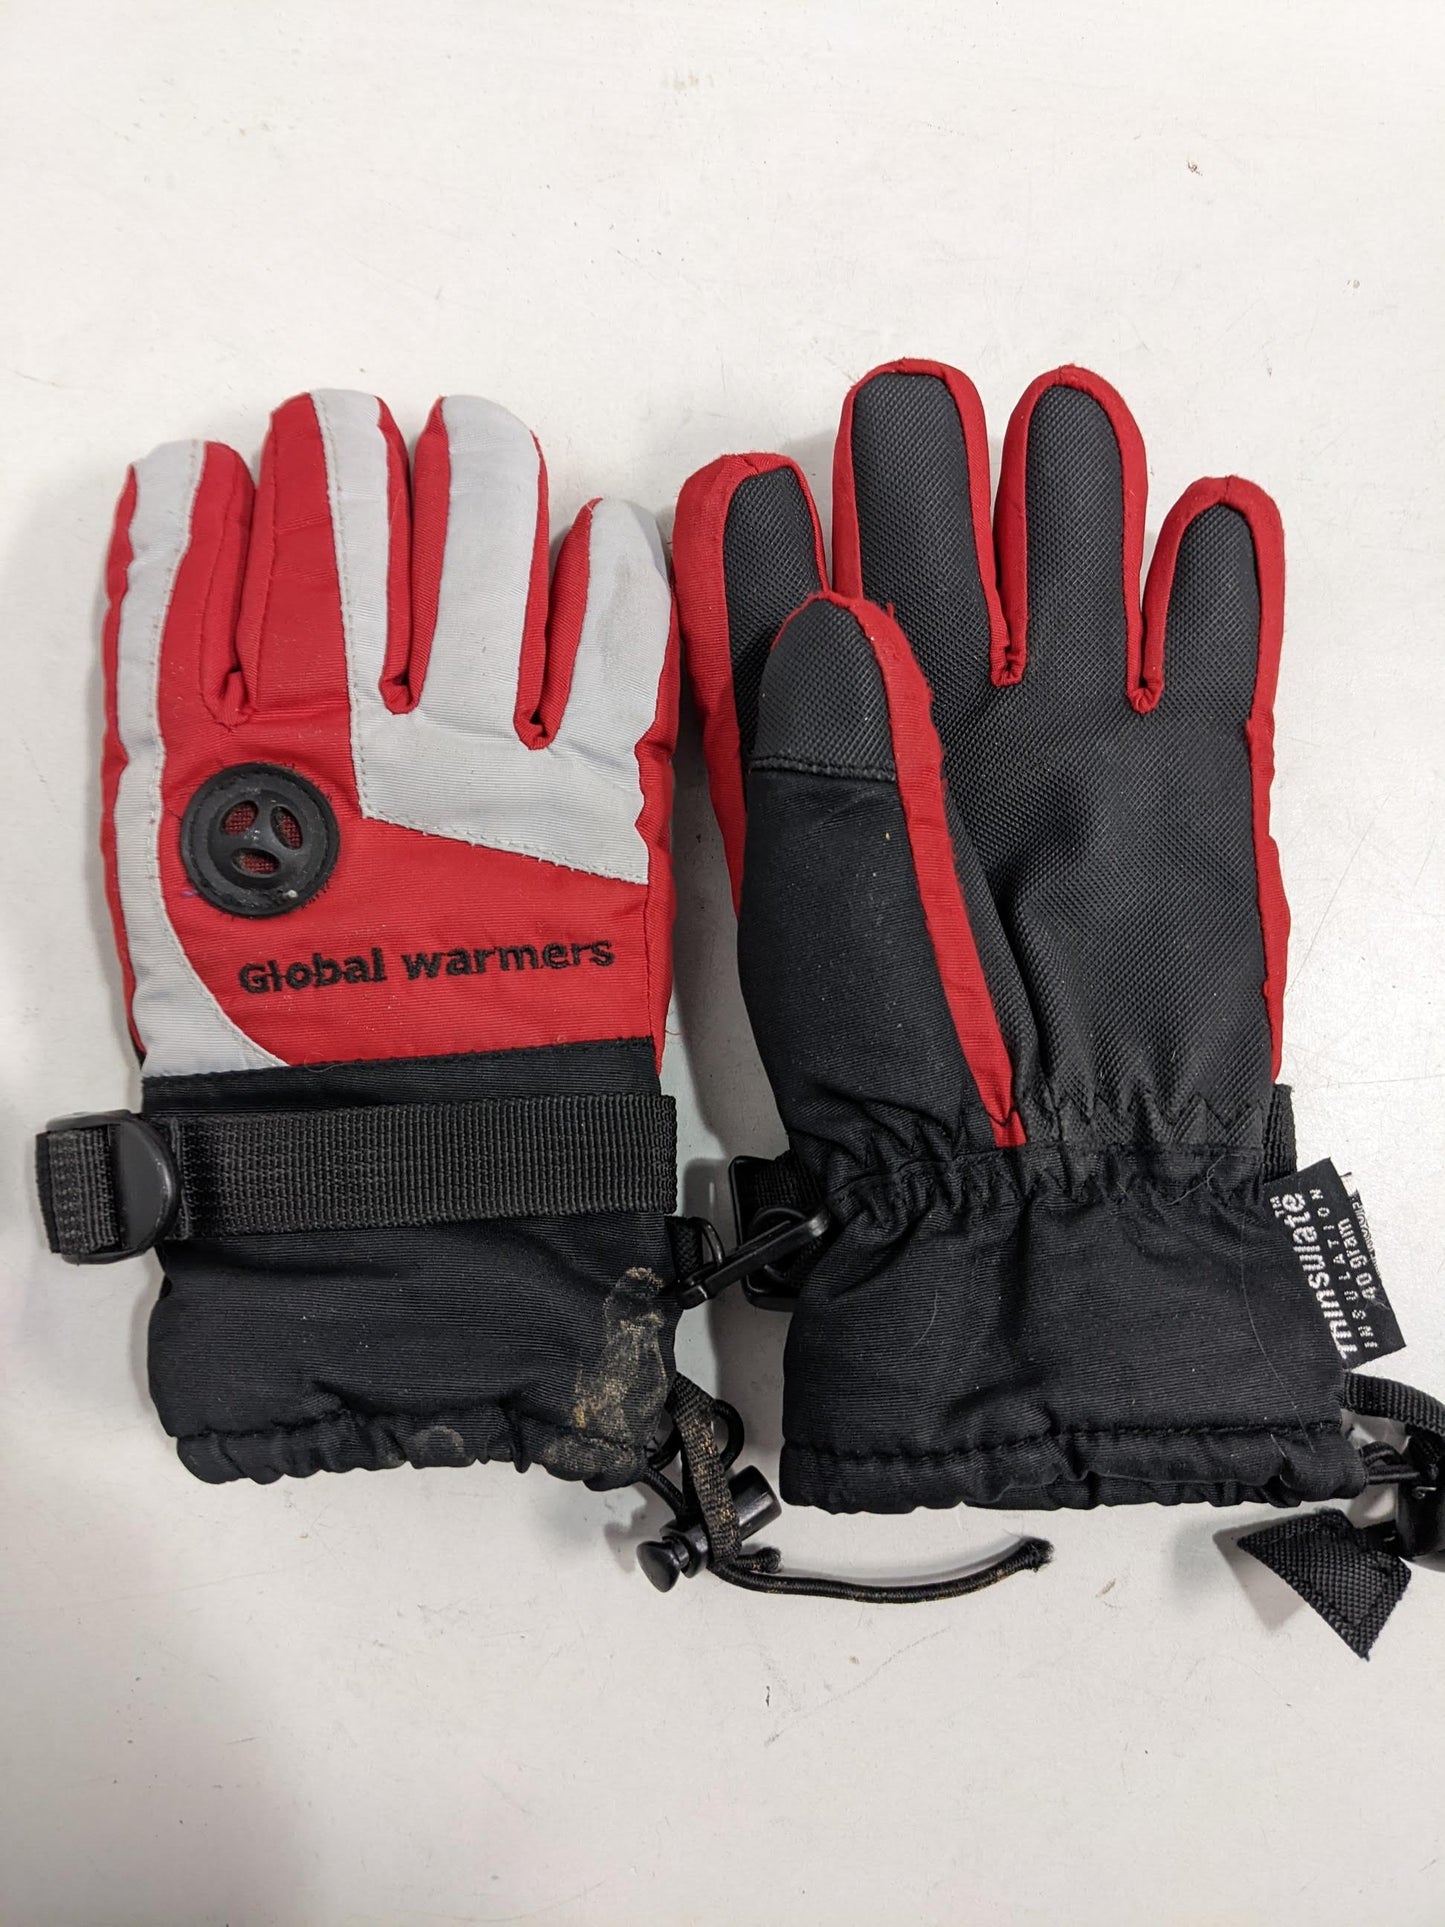 Global Warmers Youth Insulated Winter Gloves Size Youth 2-4 Years Red Used